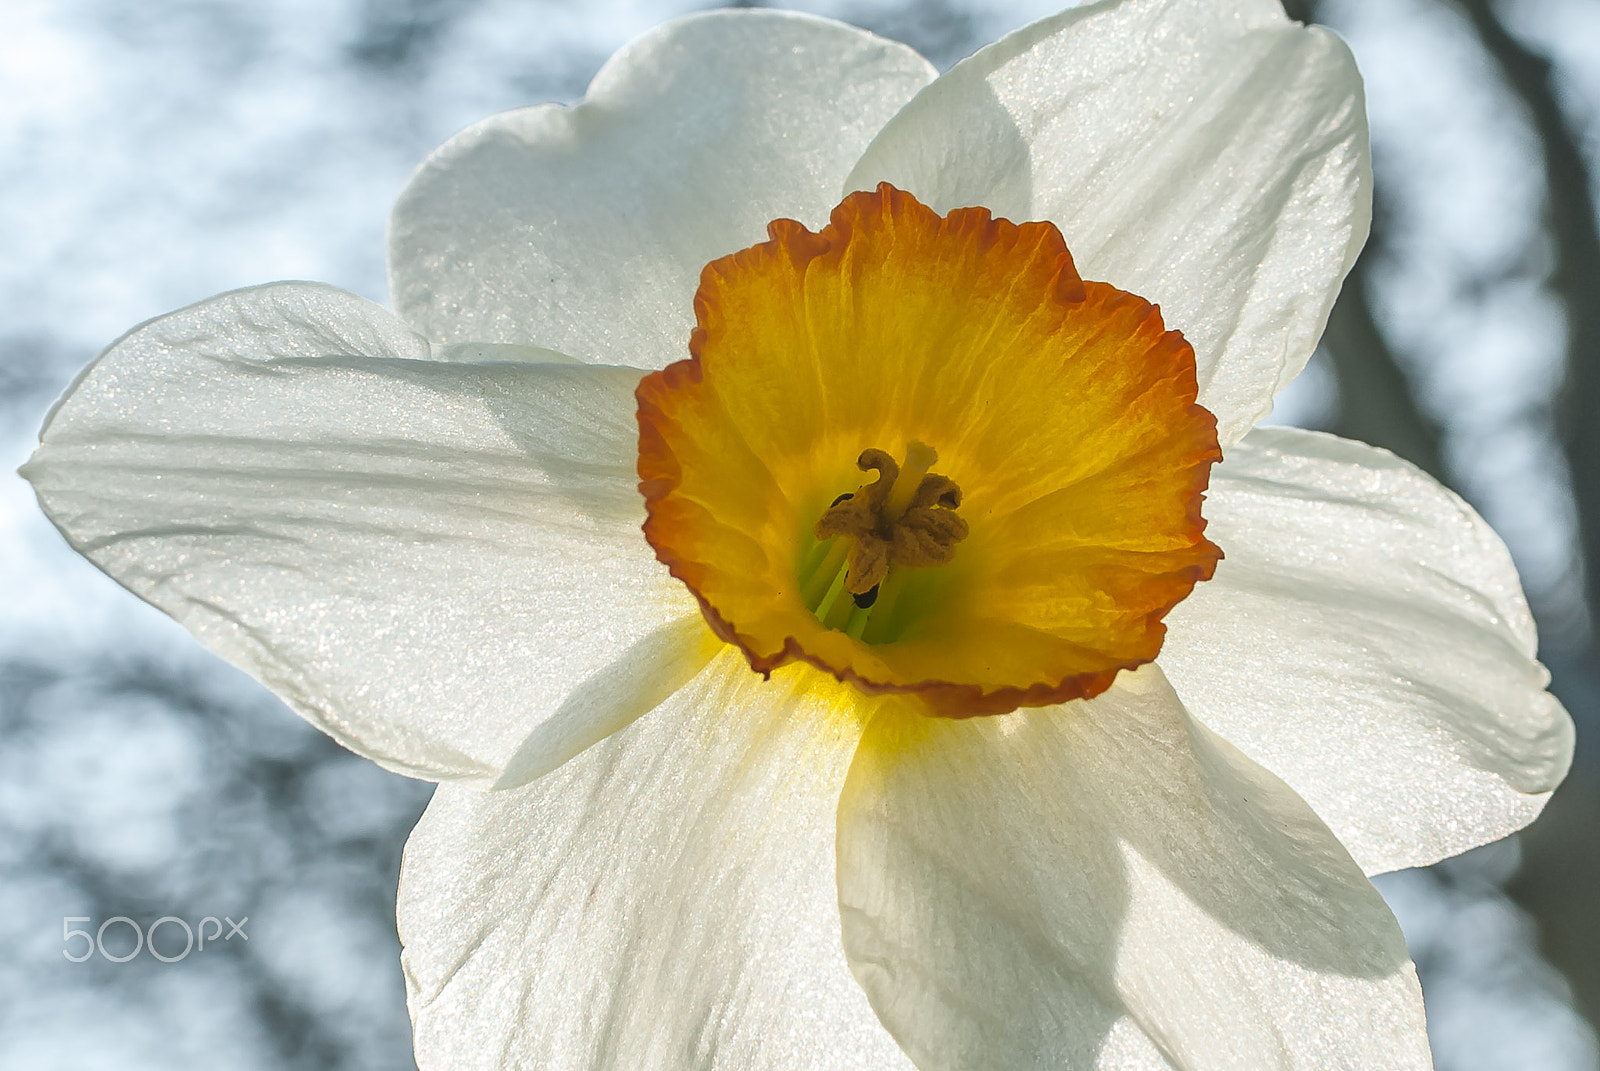 Nikon D200 sample photo. White daffodil with yellow centre photography